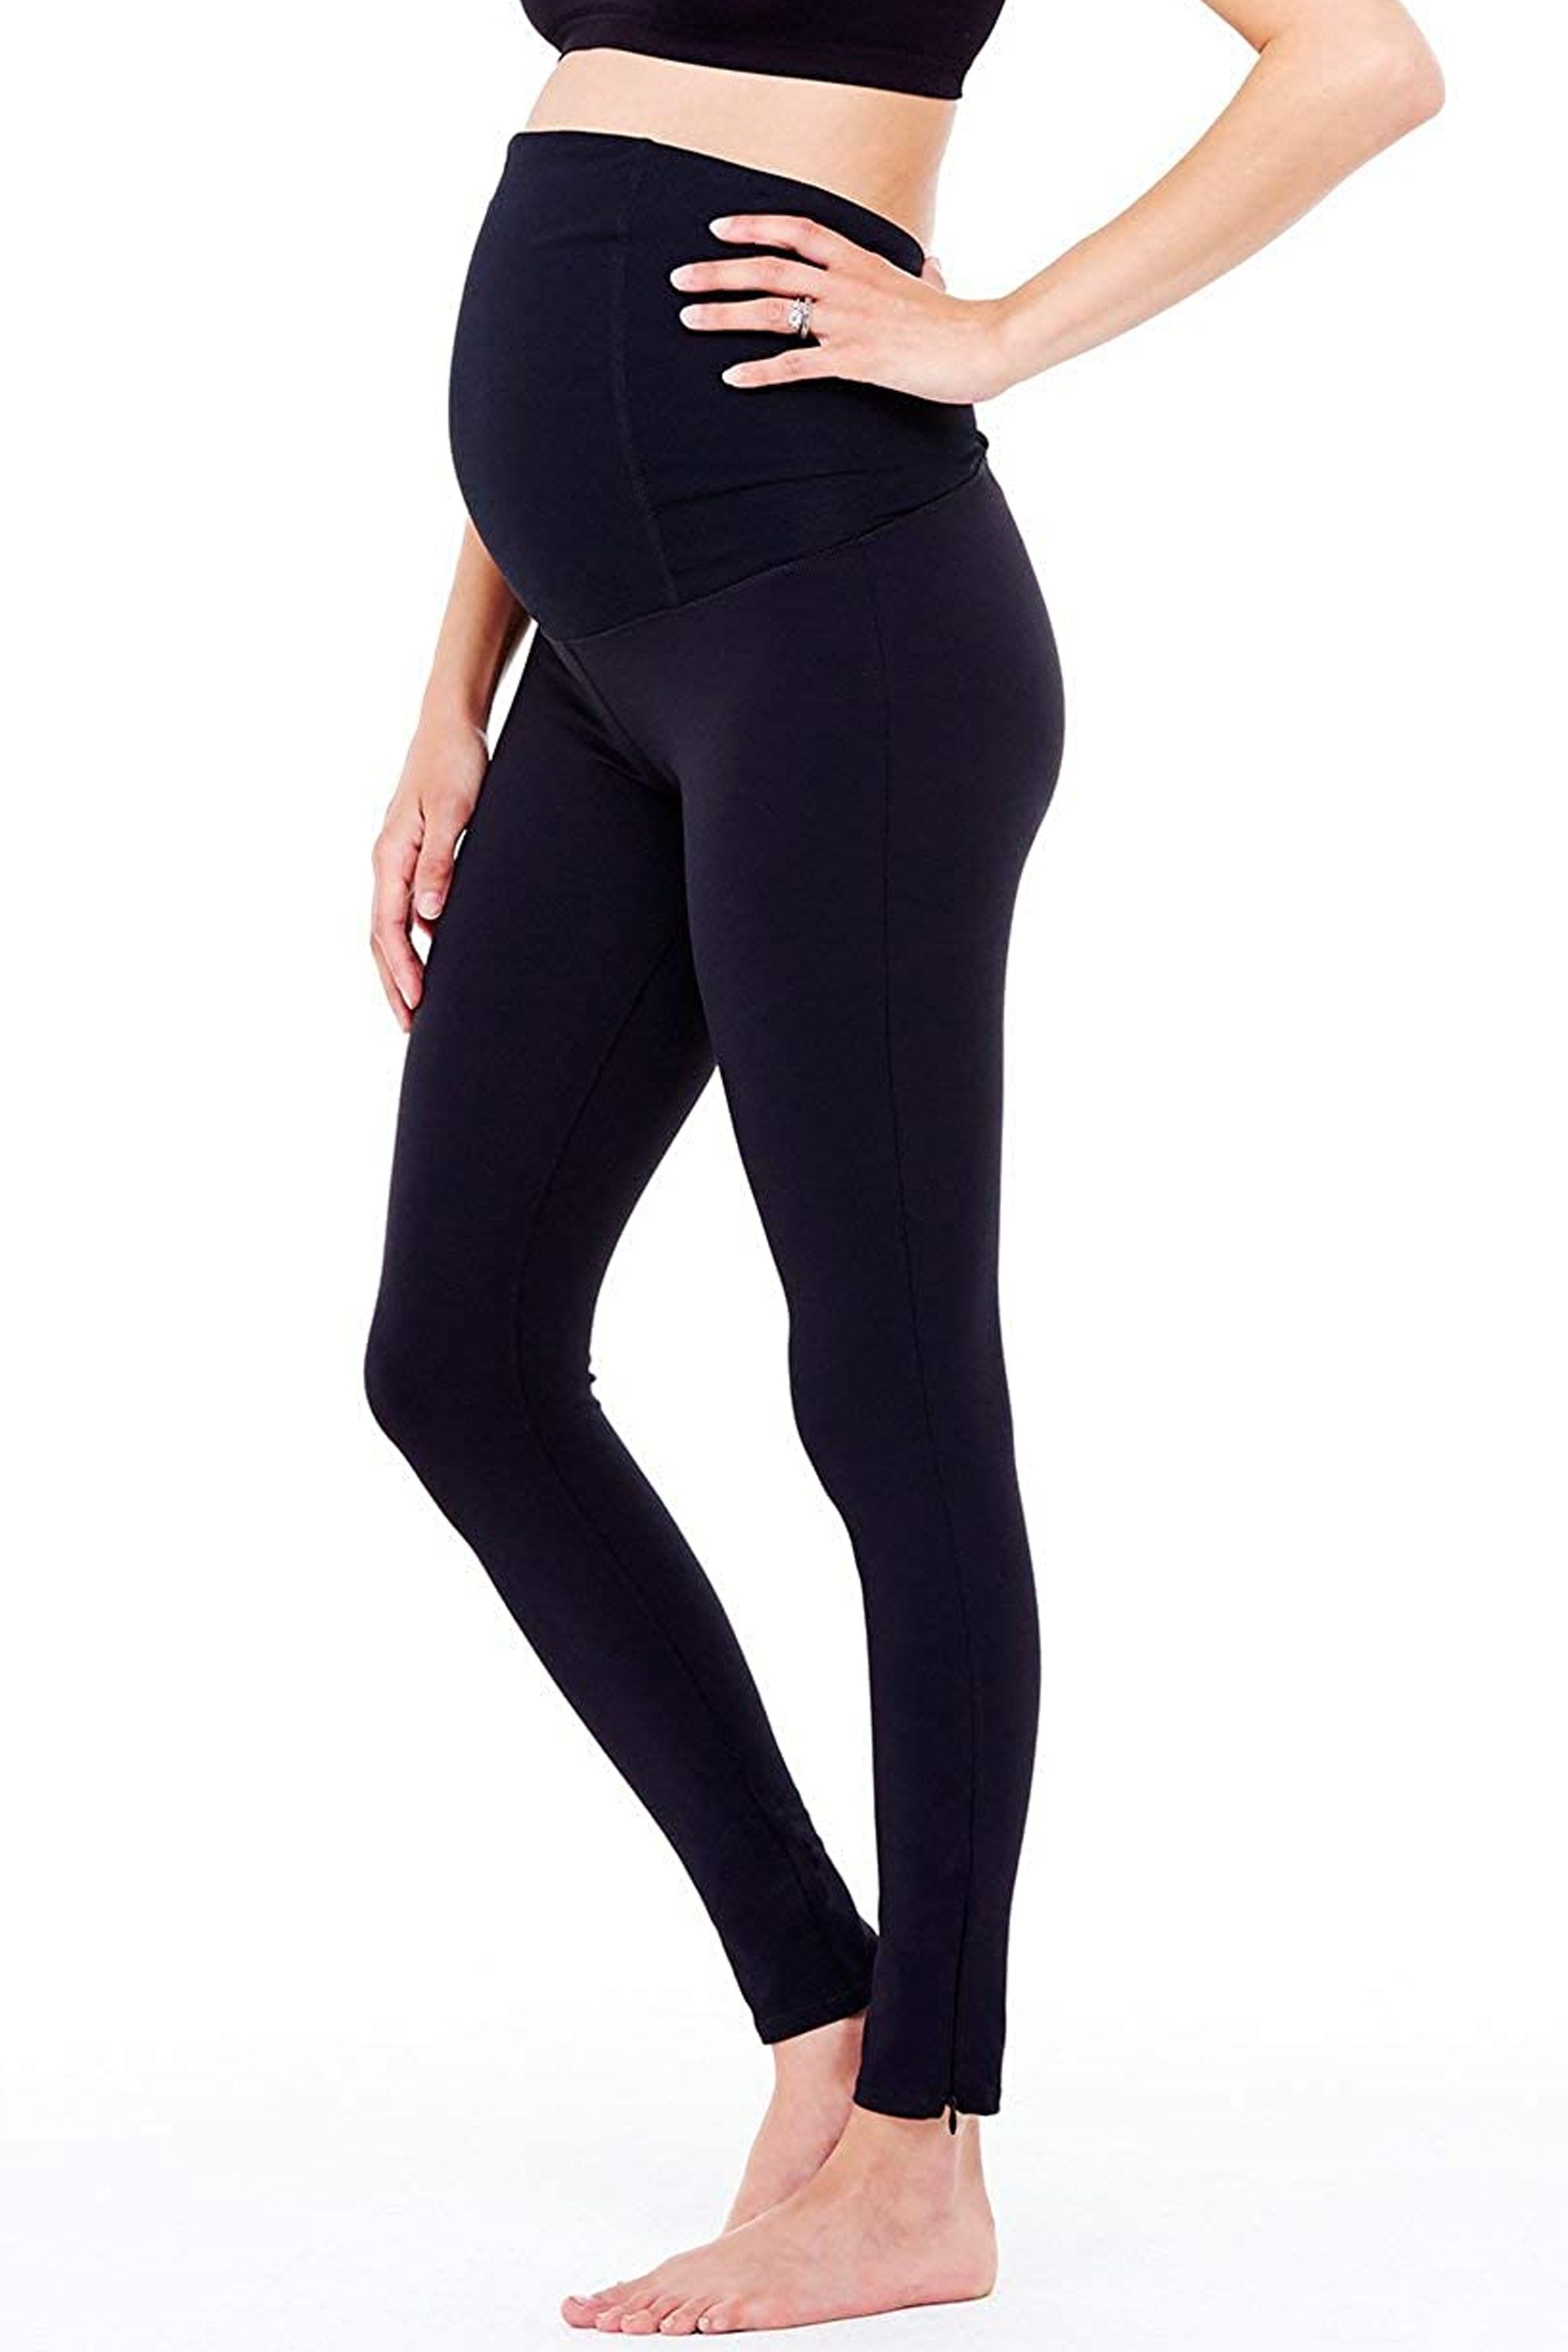 V VOCNI Womens Faux Leather Maternity Leggings Pants Stretchy Over-Belly Pregnancy Tights